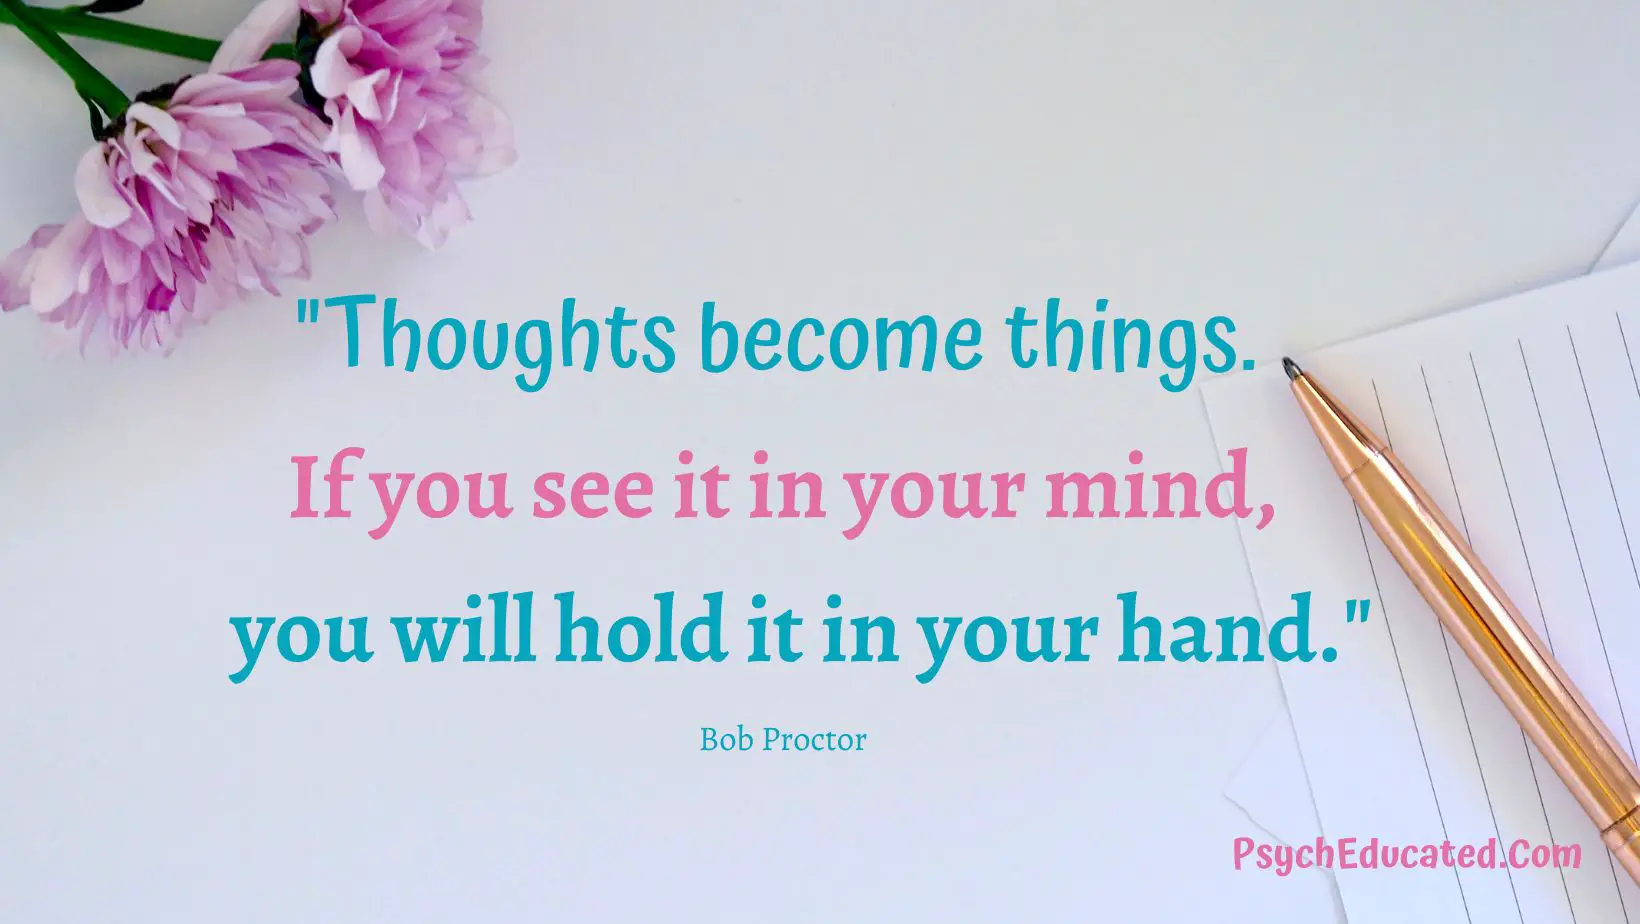 Thoughts become things. If you see it in your mind, you will hold it in your hand. Bob Proctor